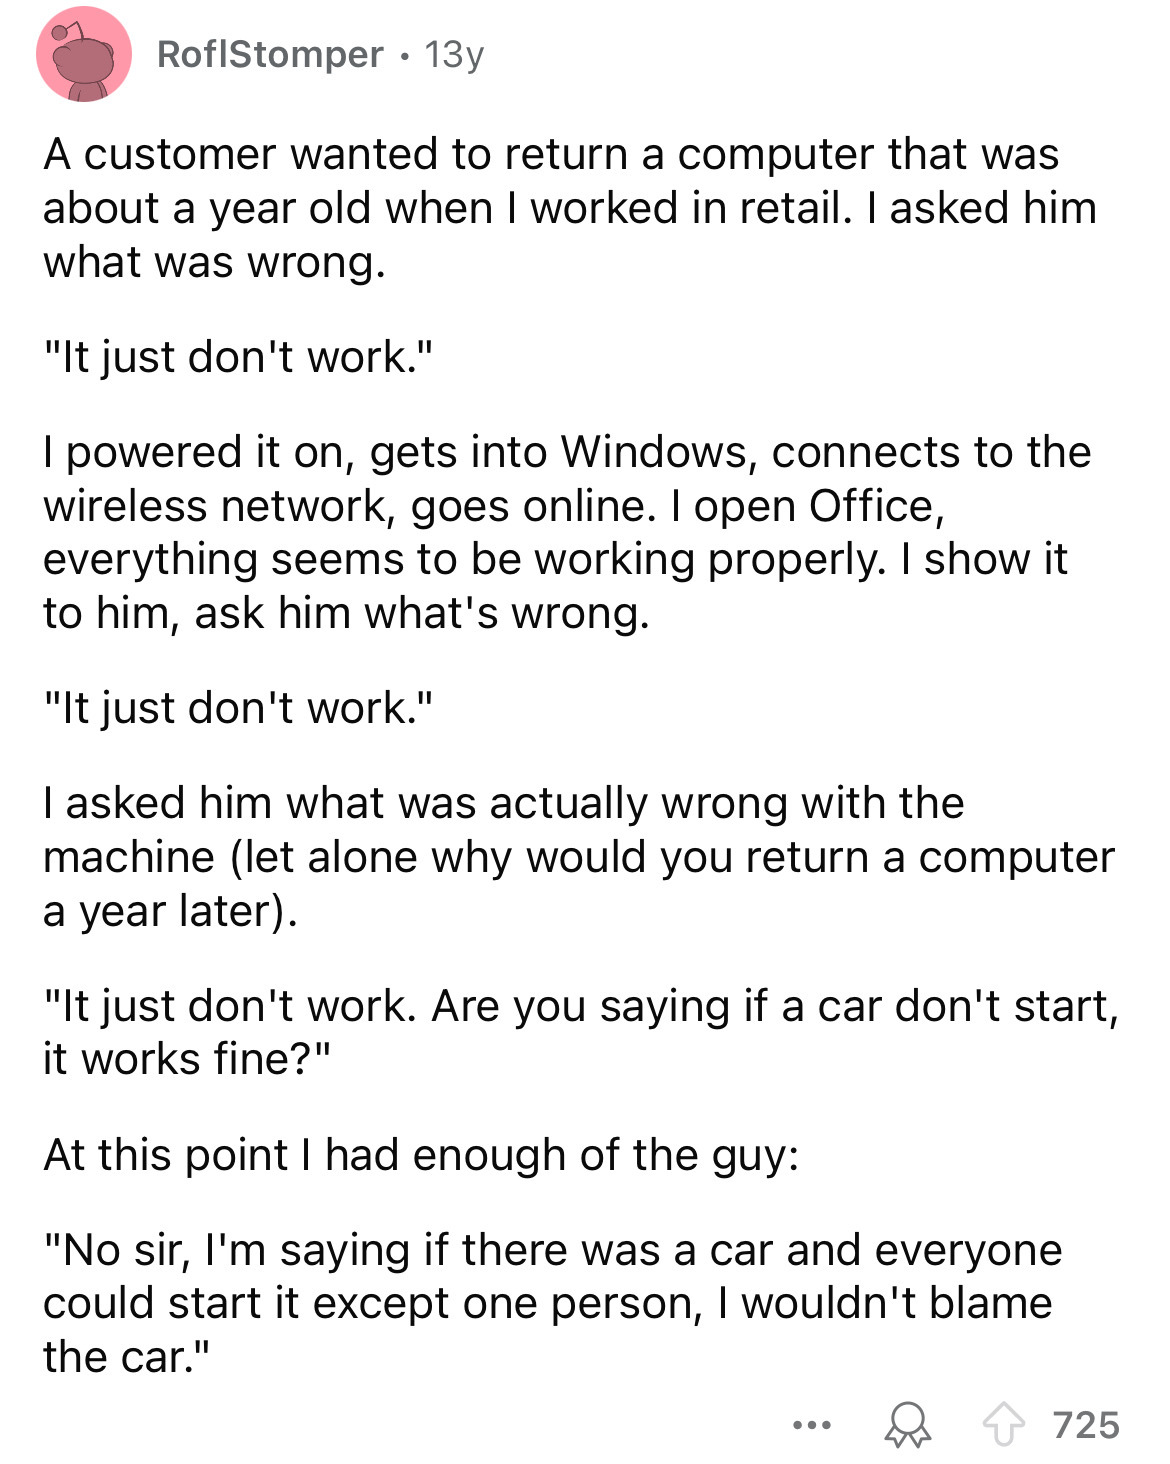 document - RoflStomper 13y A customer wanted to return a computer that was about a year old when I worked in retail. I asked him what was wrong. "It just don't work." I powered it on, gets into Windows, connects to the wireless network, goes online. I ope